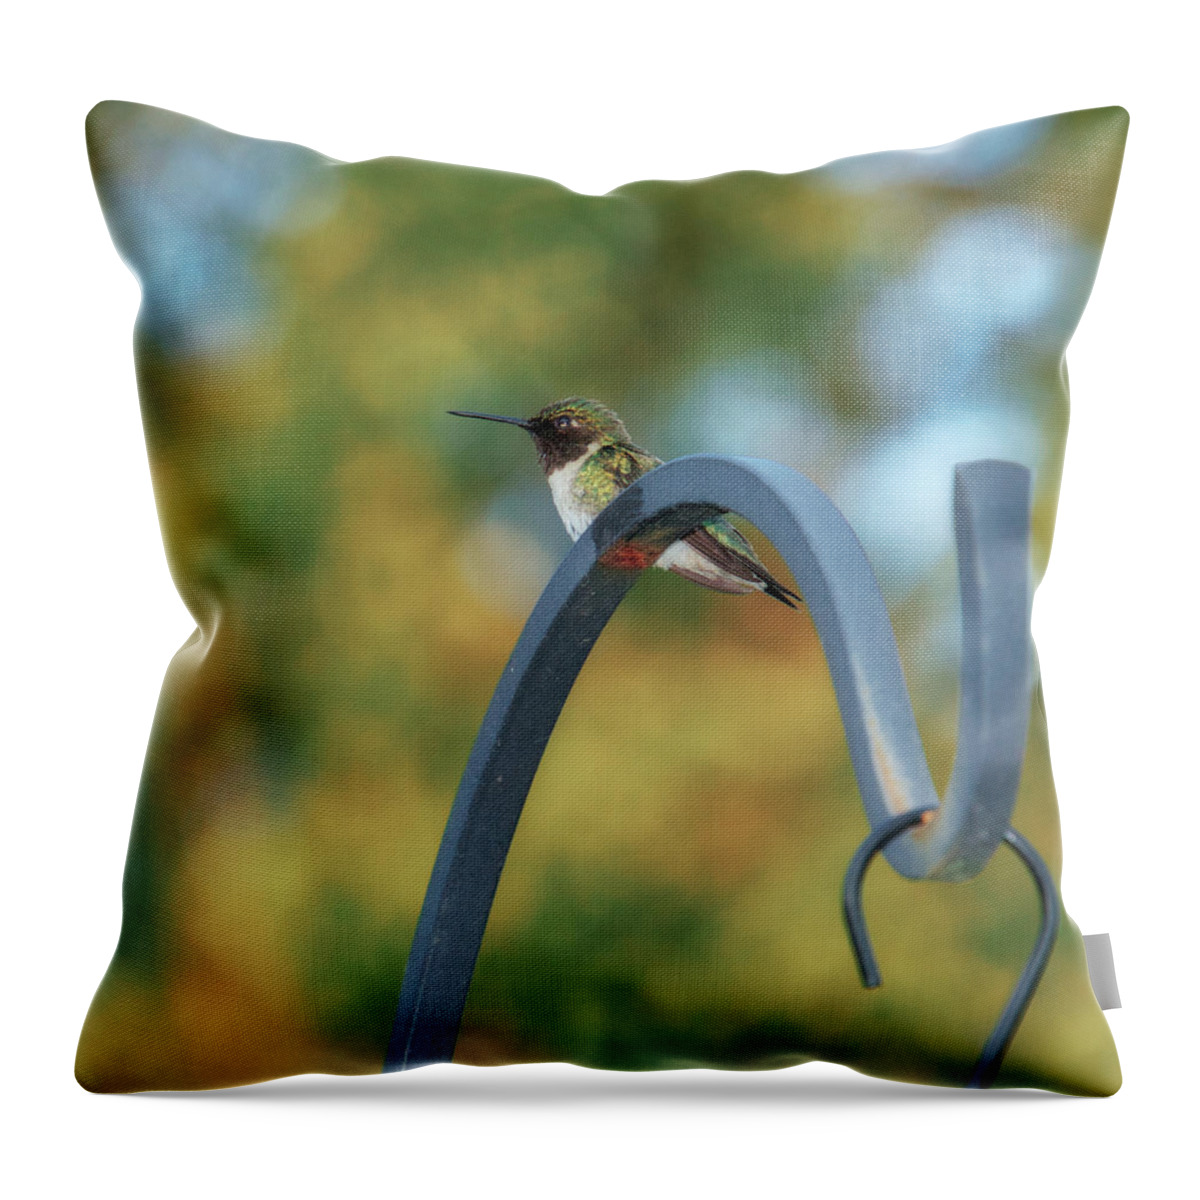 Female Throw Pillow featuring the photograph Female Ruby-Throated Hummingbird by Frank Mari